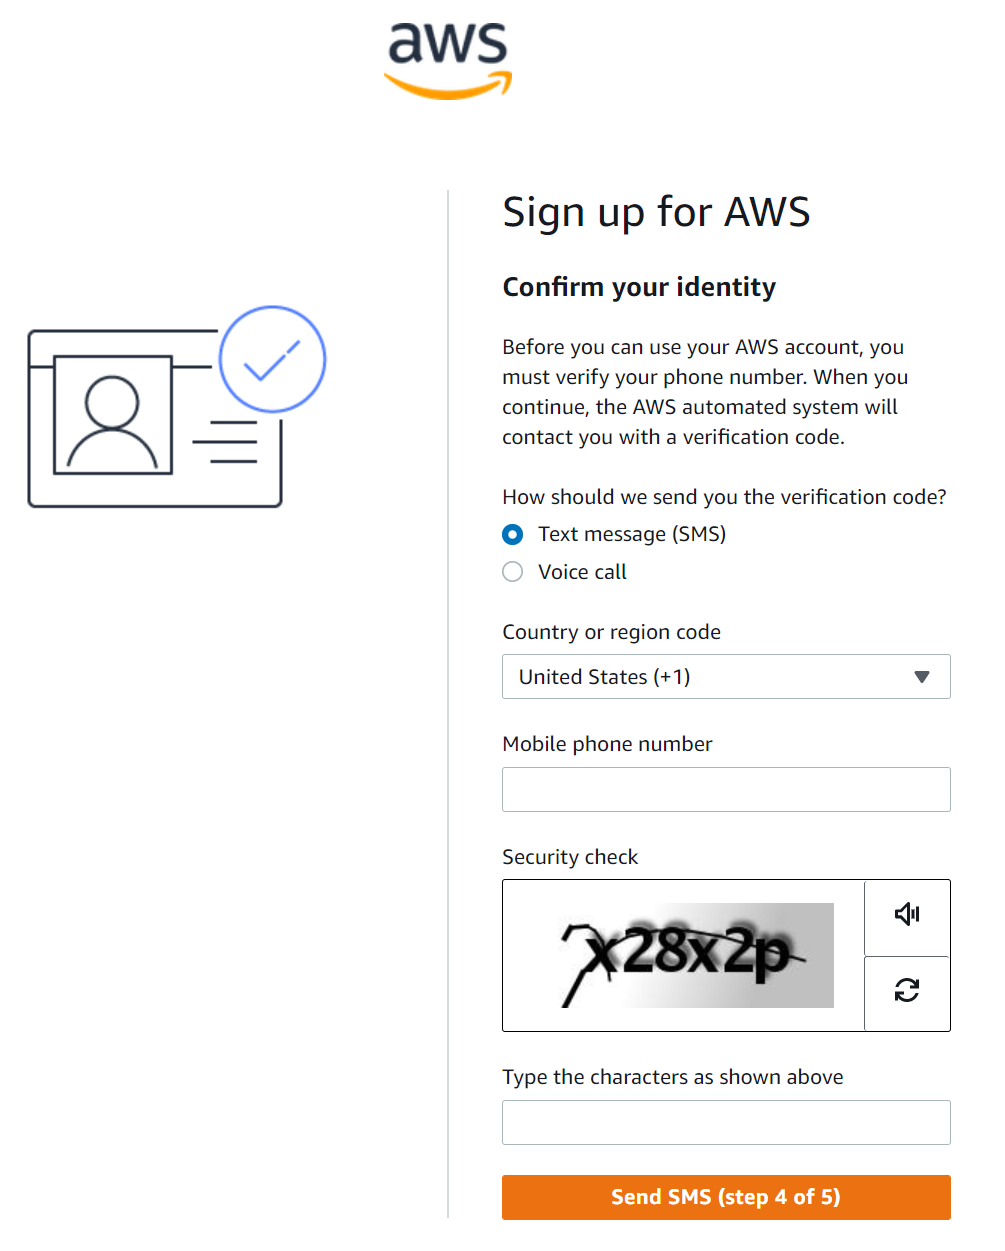 create-new-account-aws-and-own-your-first_cloud-server-create-new-account-confirm-identity